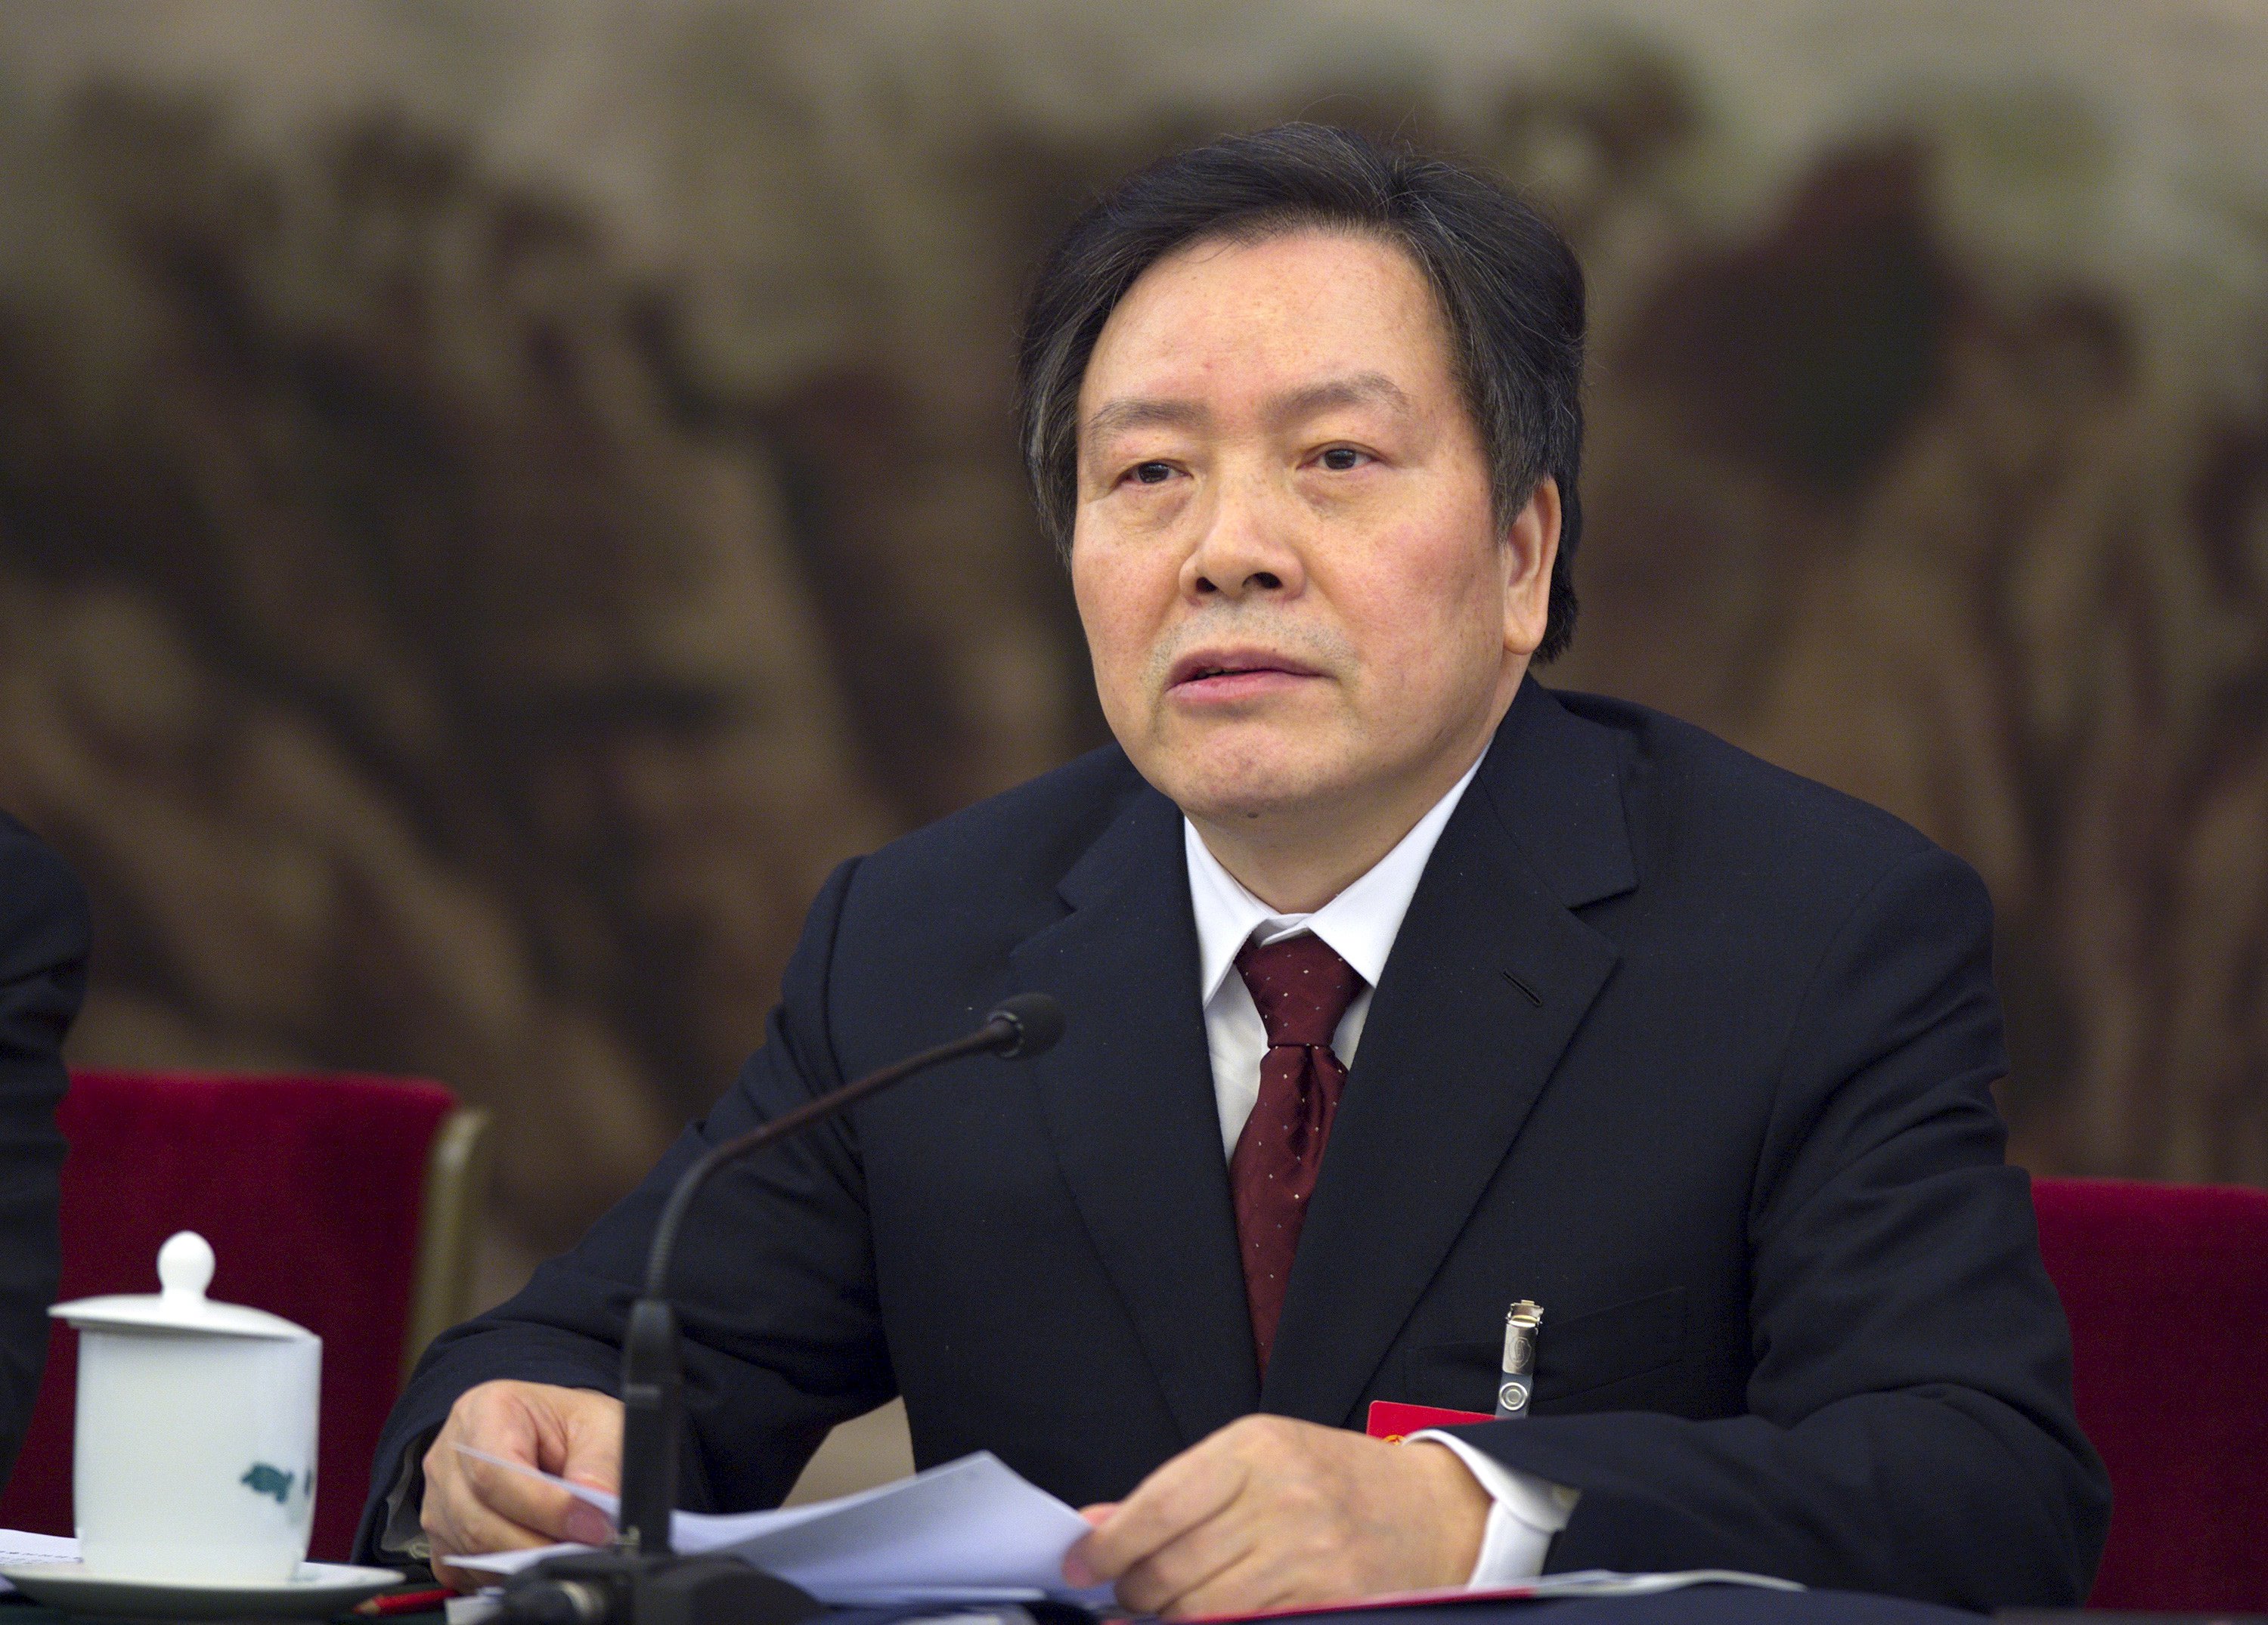 Zhou Benshun was a former Communist Party chief in Hebei province. Photo: Reuters